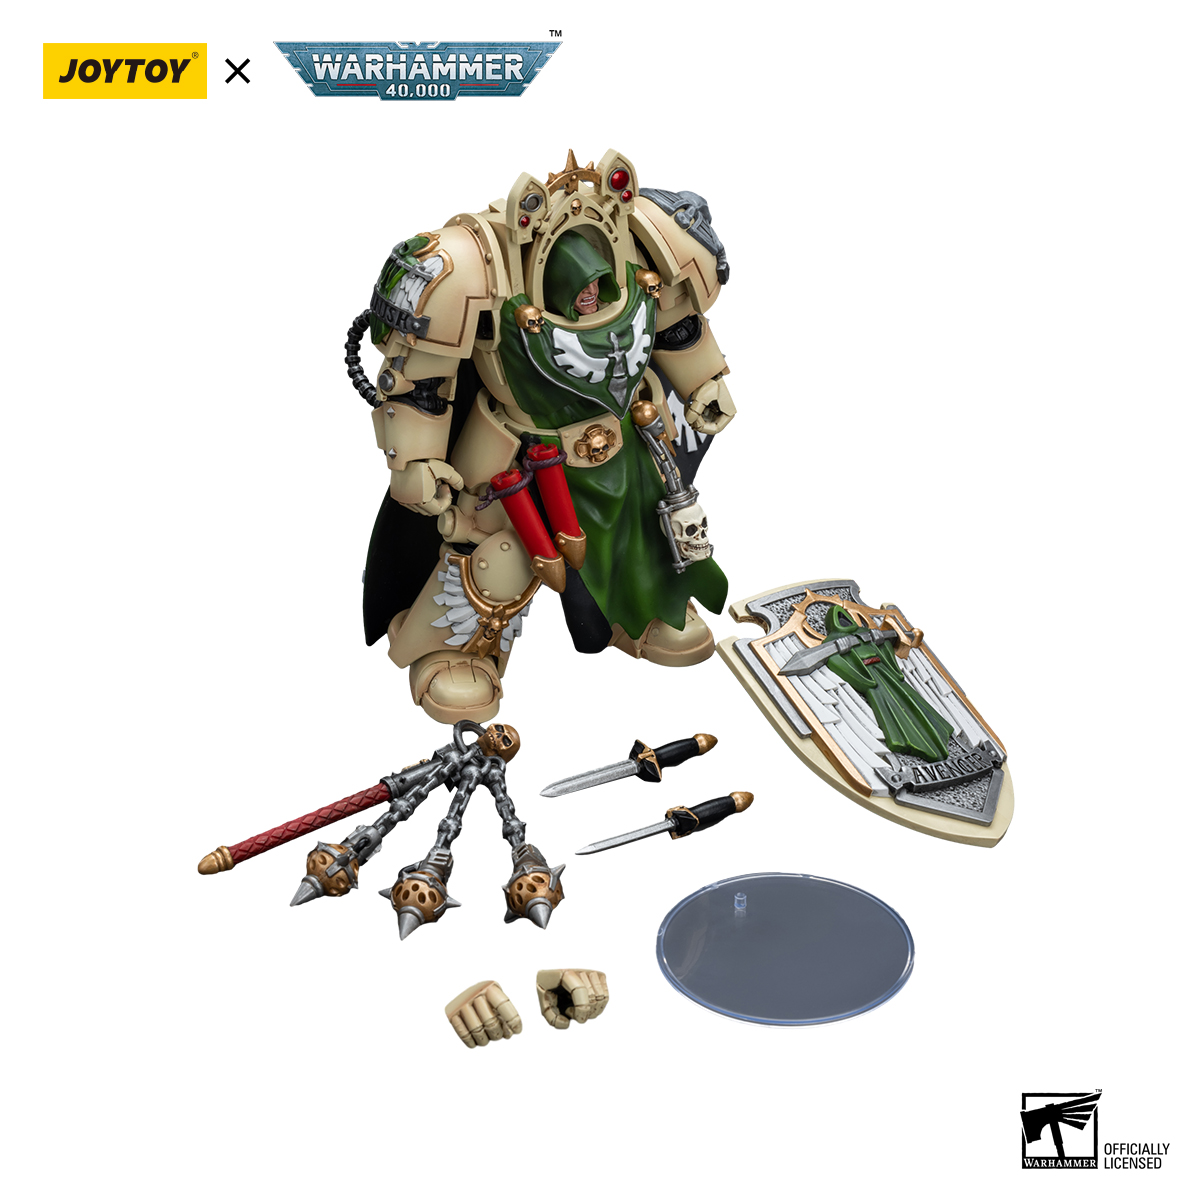 [JOYTOY] Dark Angels Deathwing Knight Master with Flail of the Unforgiven-1709890567-3vsA6.jpg